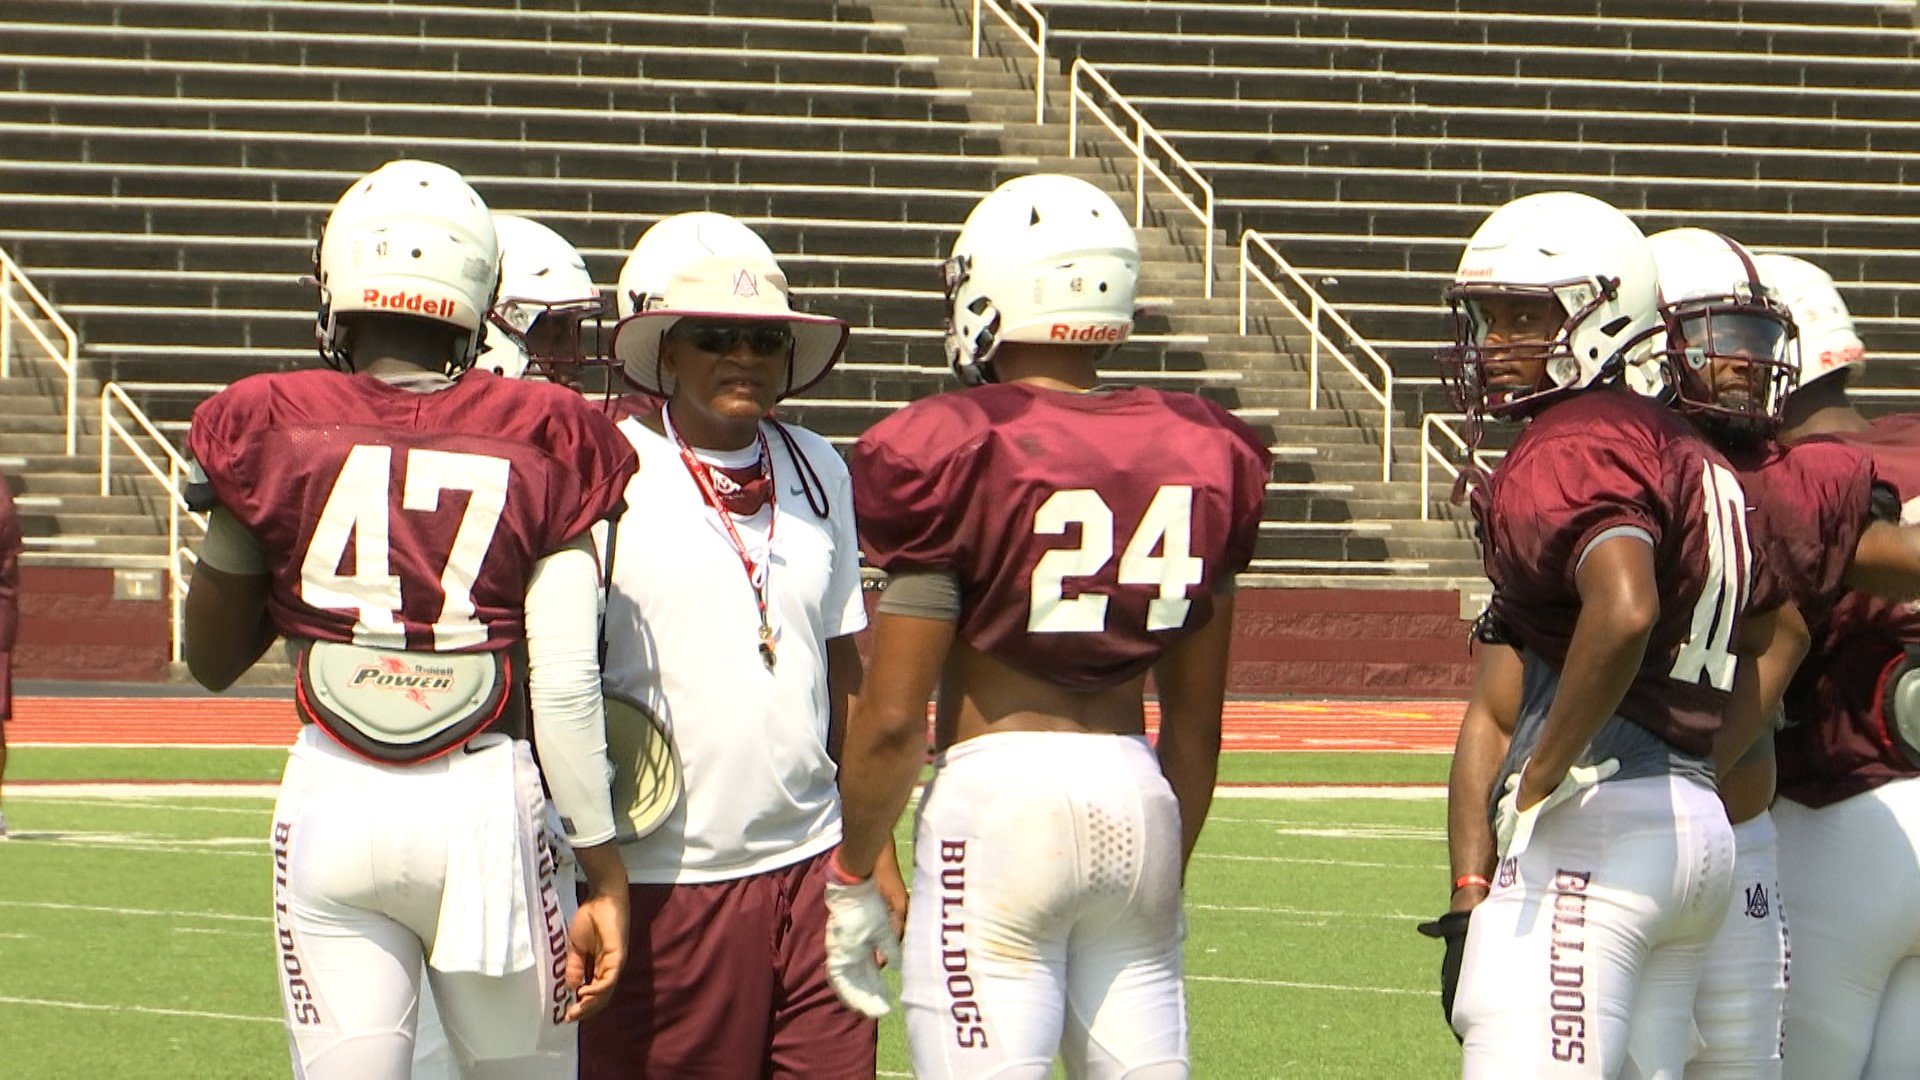 Alabama A&M renews its rivalry with Tuskegee this Saturday in Mobile at the Gulf Coast Challenge. Coach Maynor and his team aren't taking Skegee lightly.